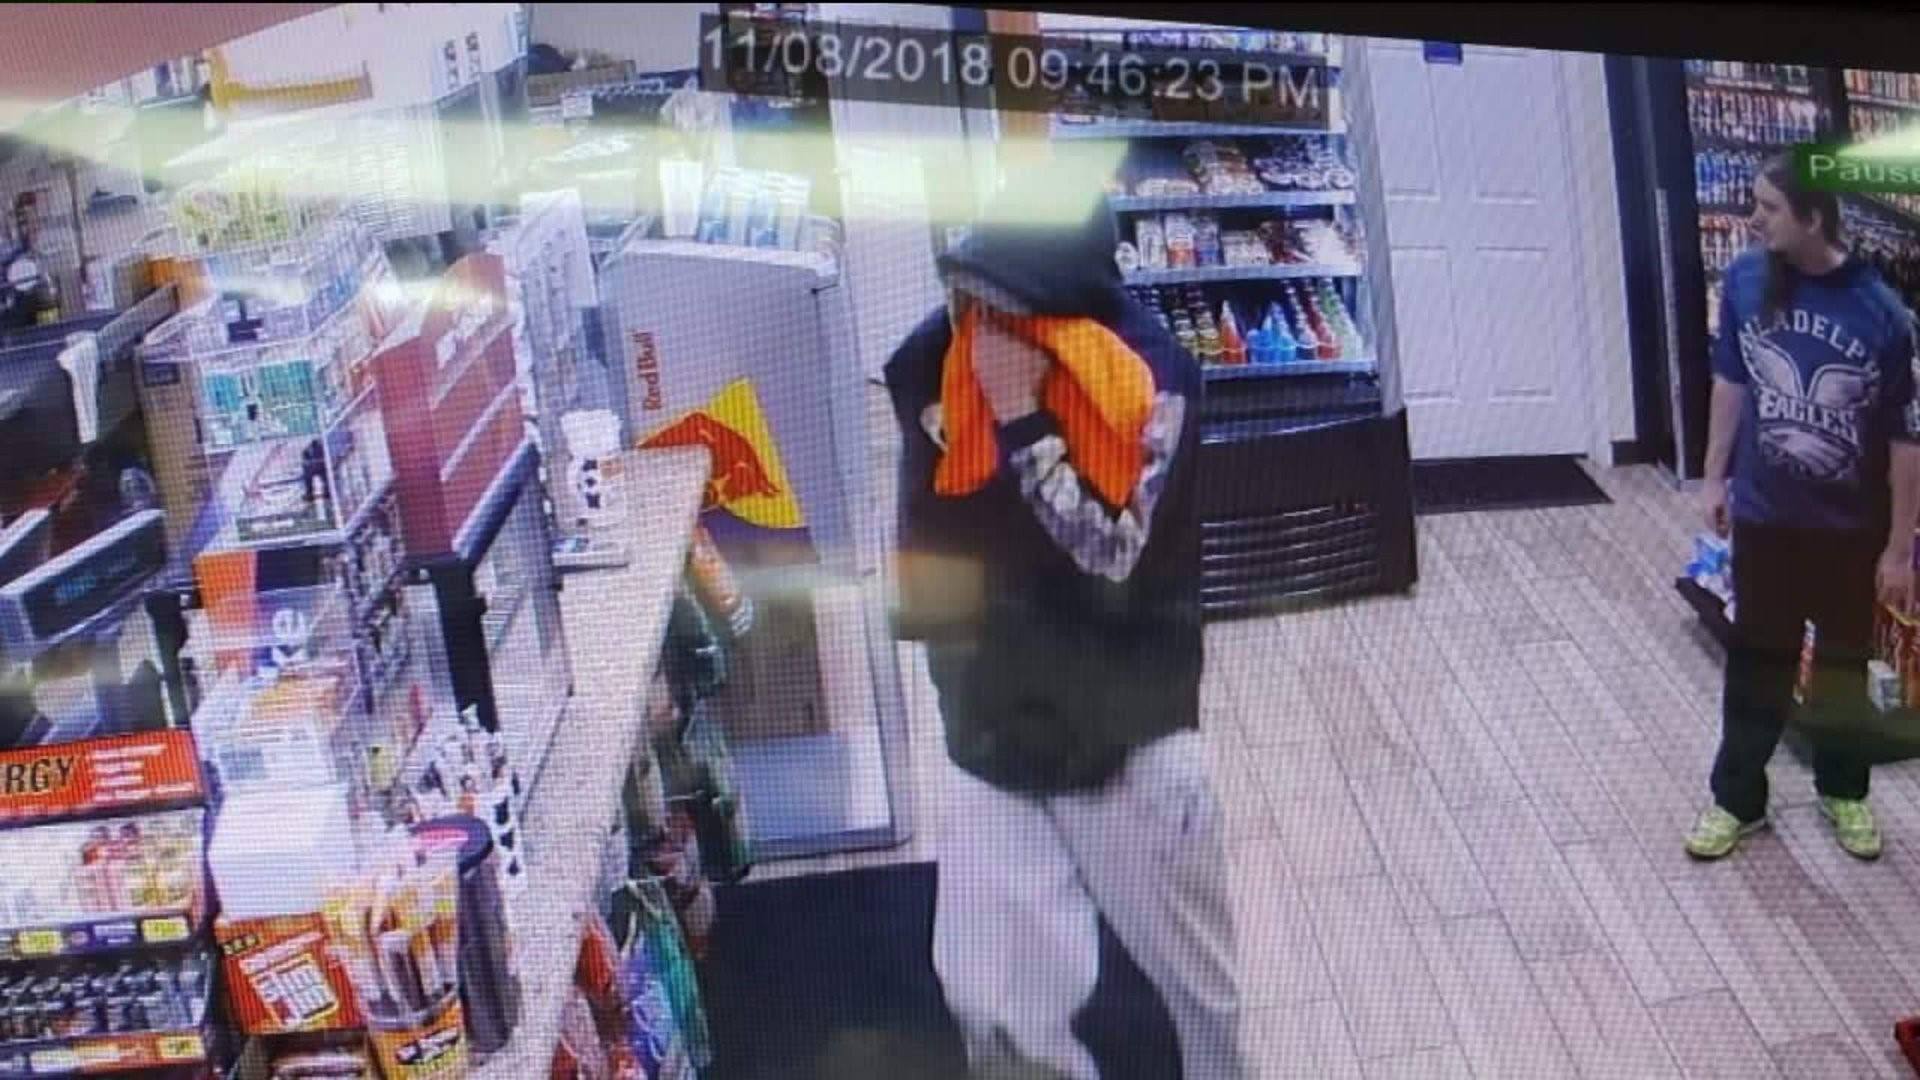 Arrest Made in Mini-Mart Robbery